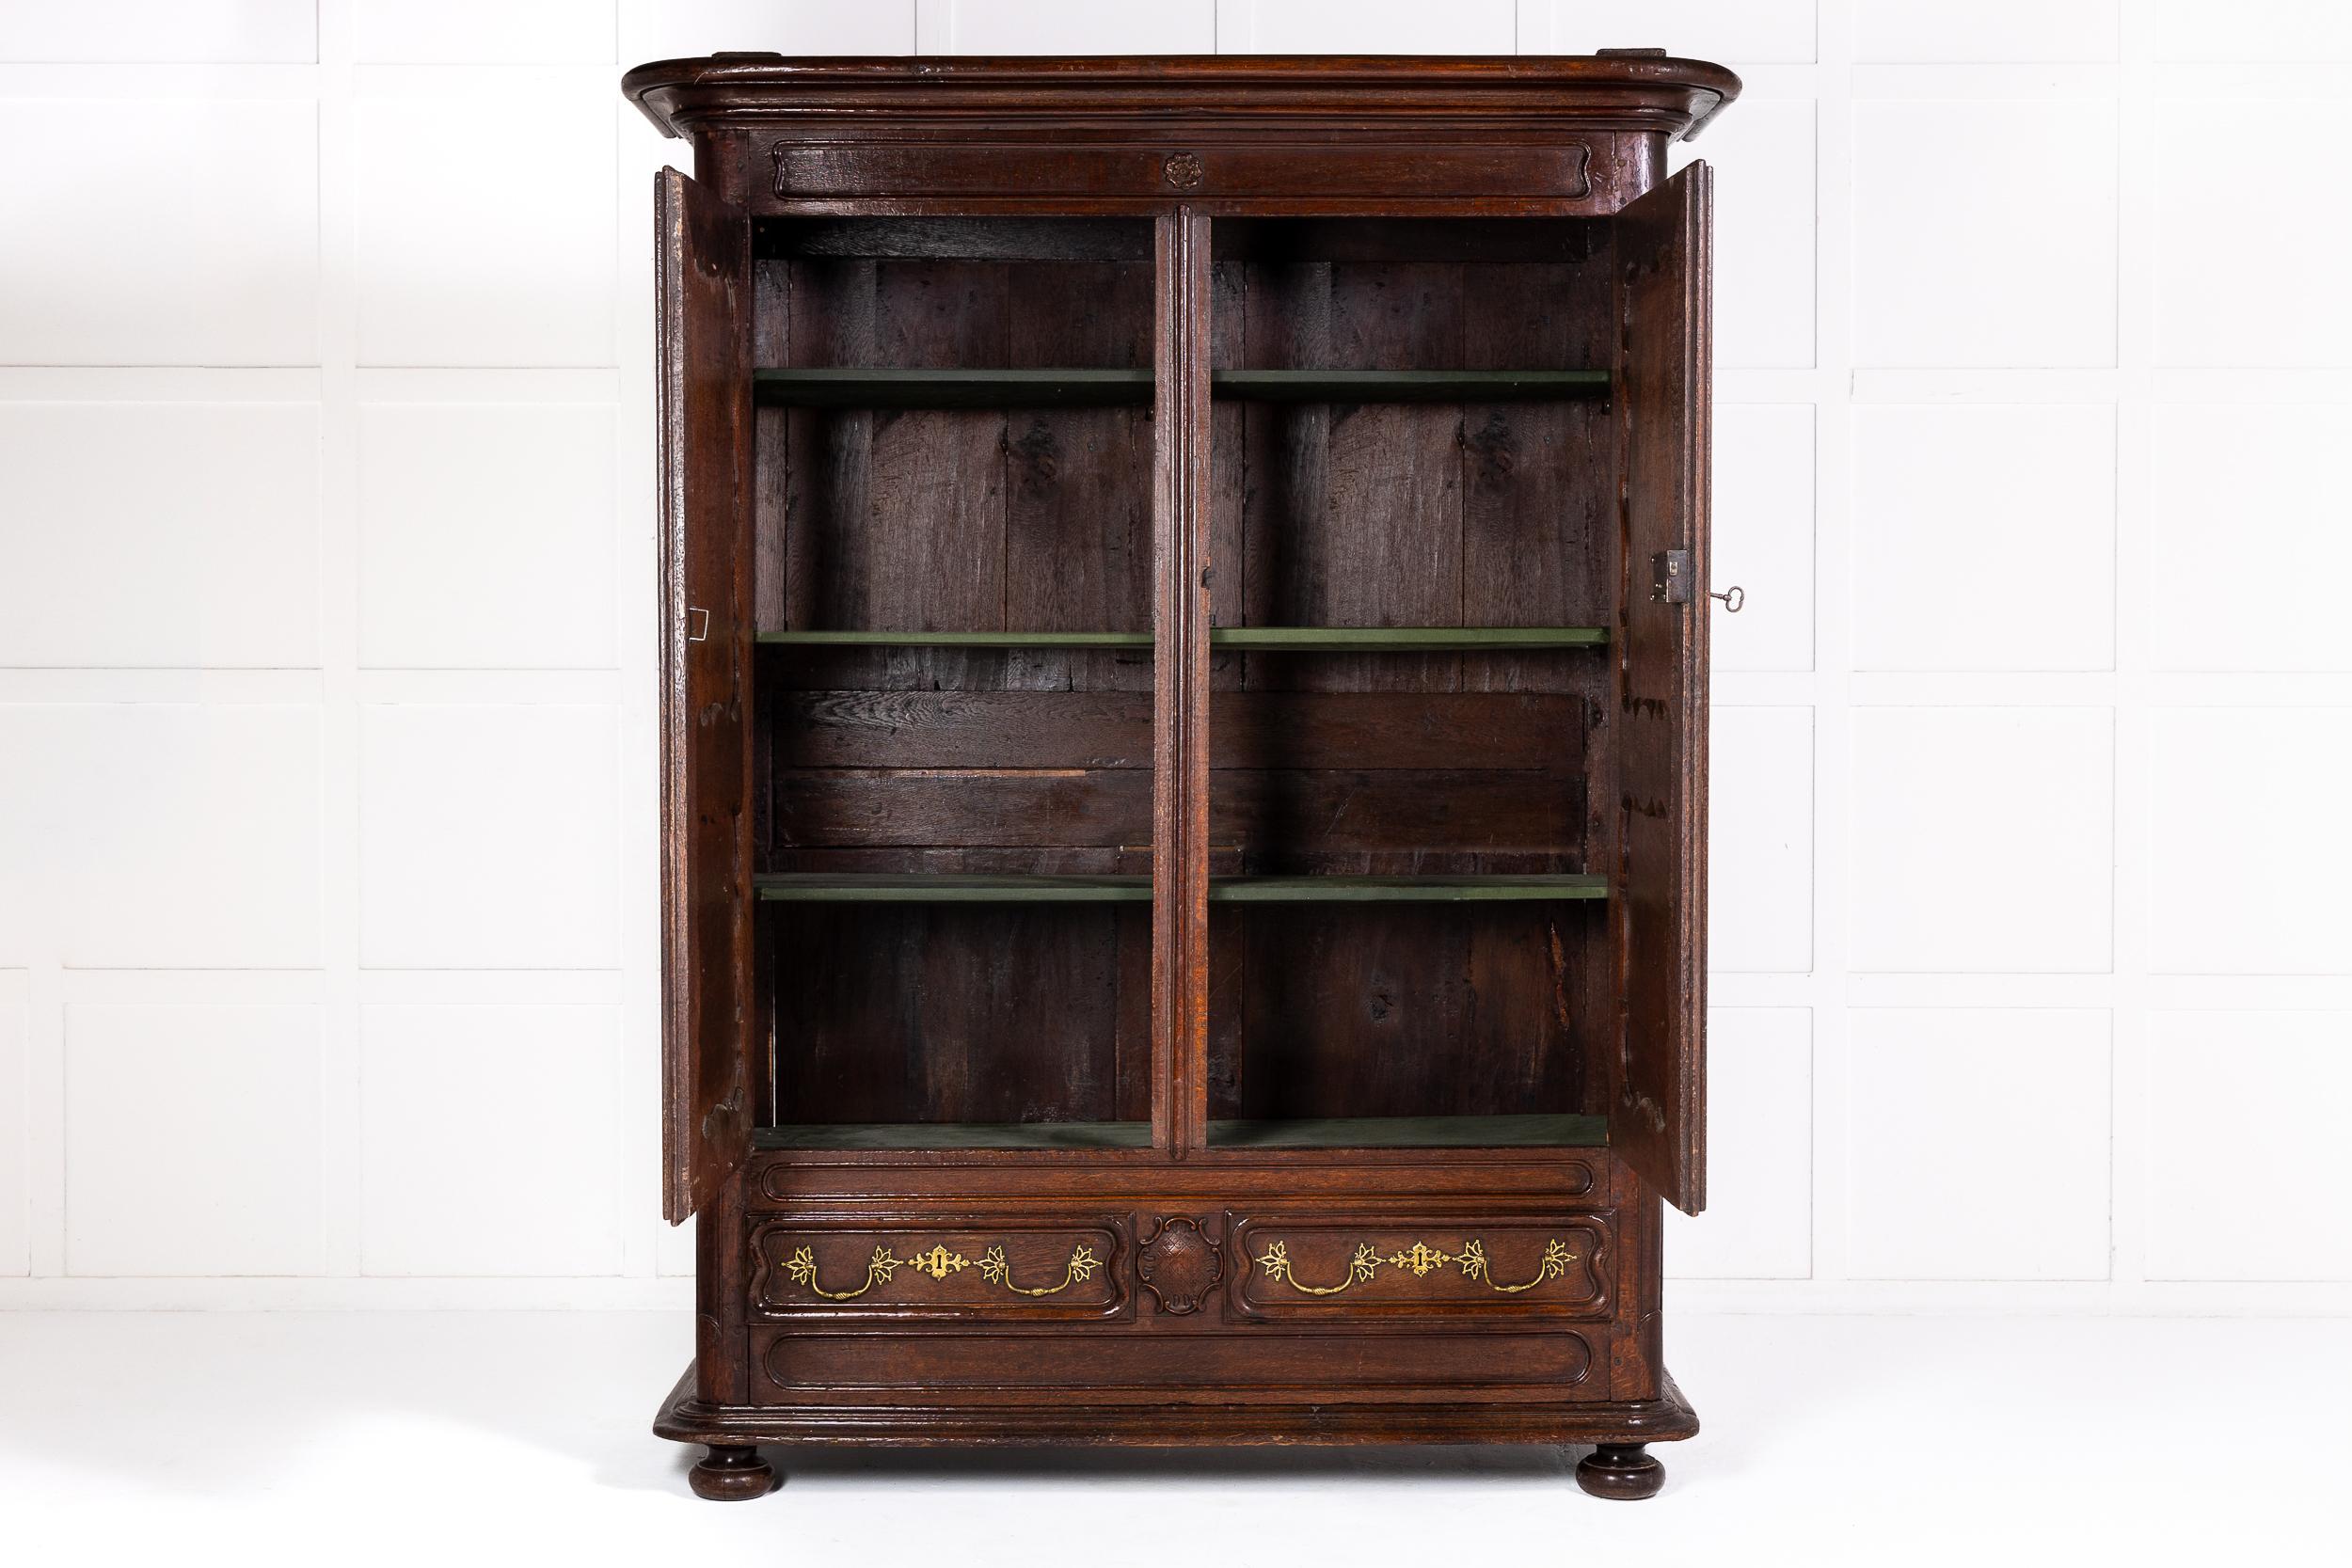 A Fine Mid 18th Century French Provincial Oak Armoire or Cupboard of Substantial Quality.

This fine armoire was made around the middle of the 18th century in France and incorporates rococo features such as the finely panelled front and,